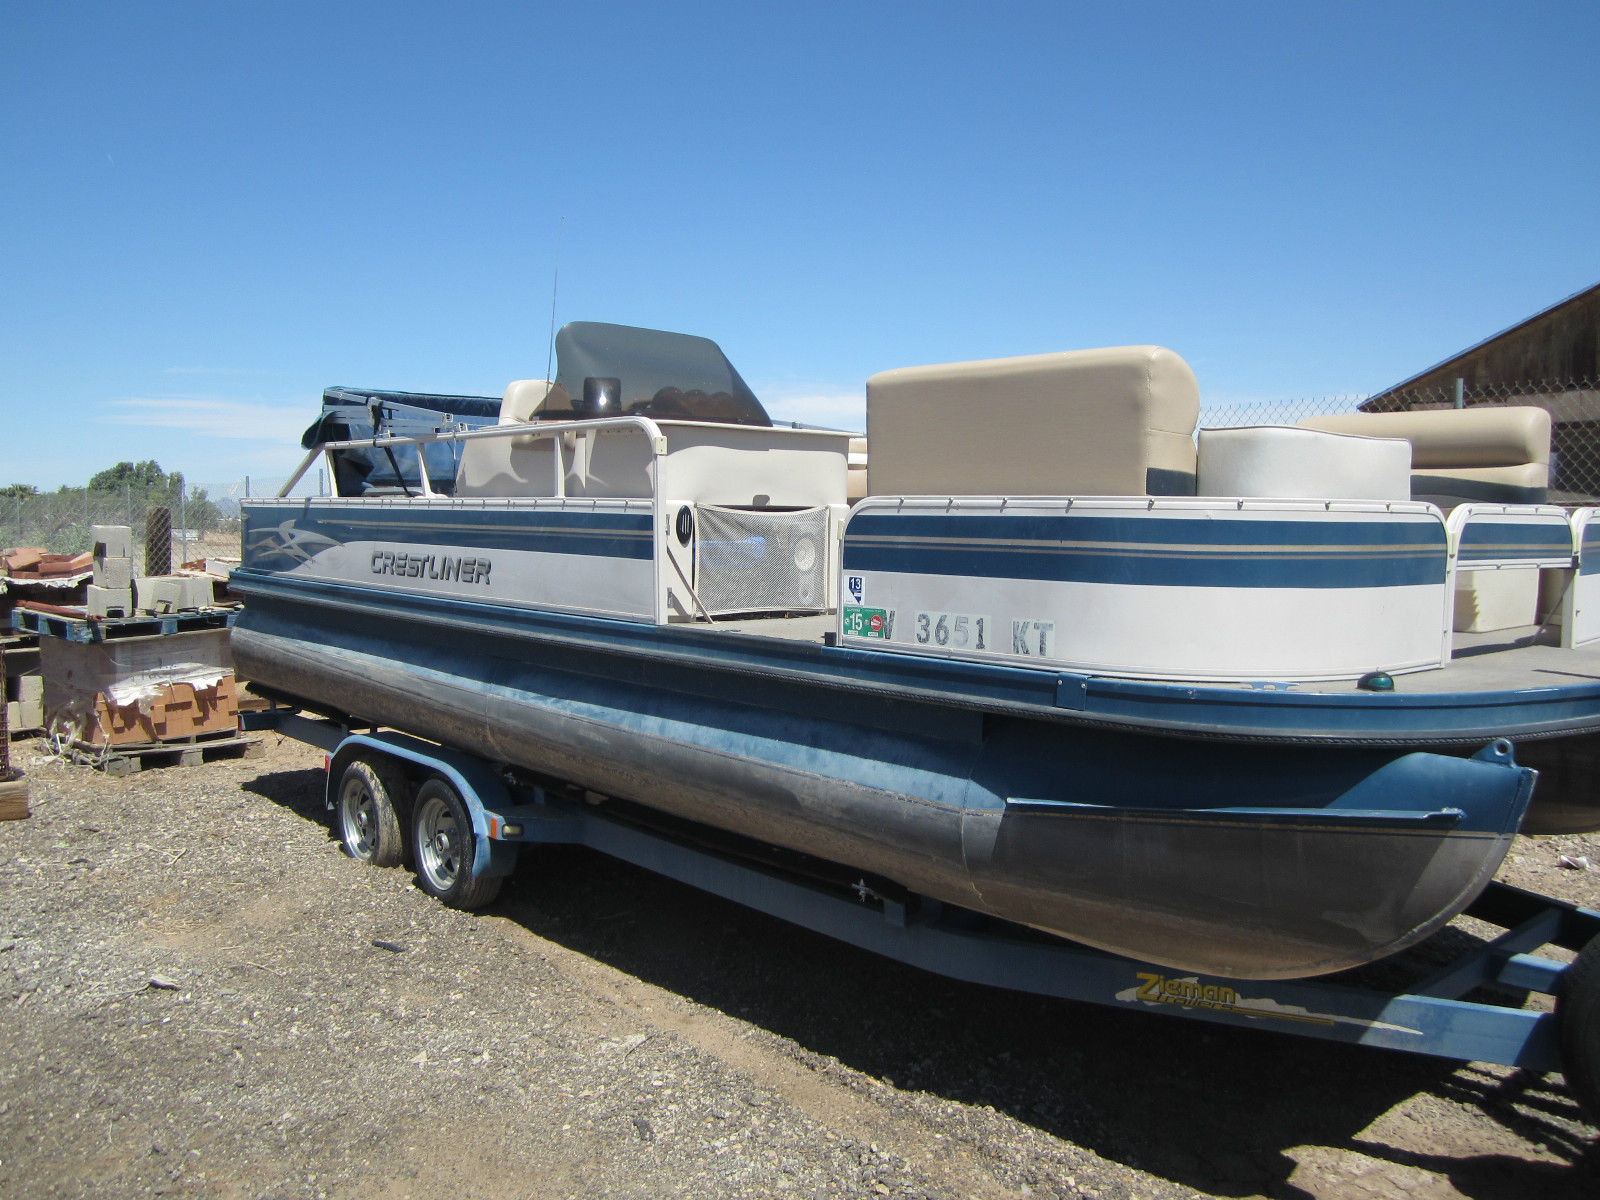 Crestliner 2002 for sale for $5,999 - Boats-from-USA.com